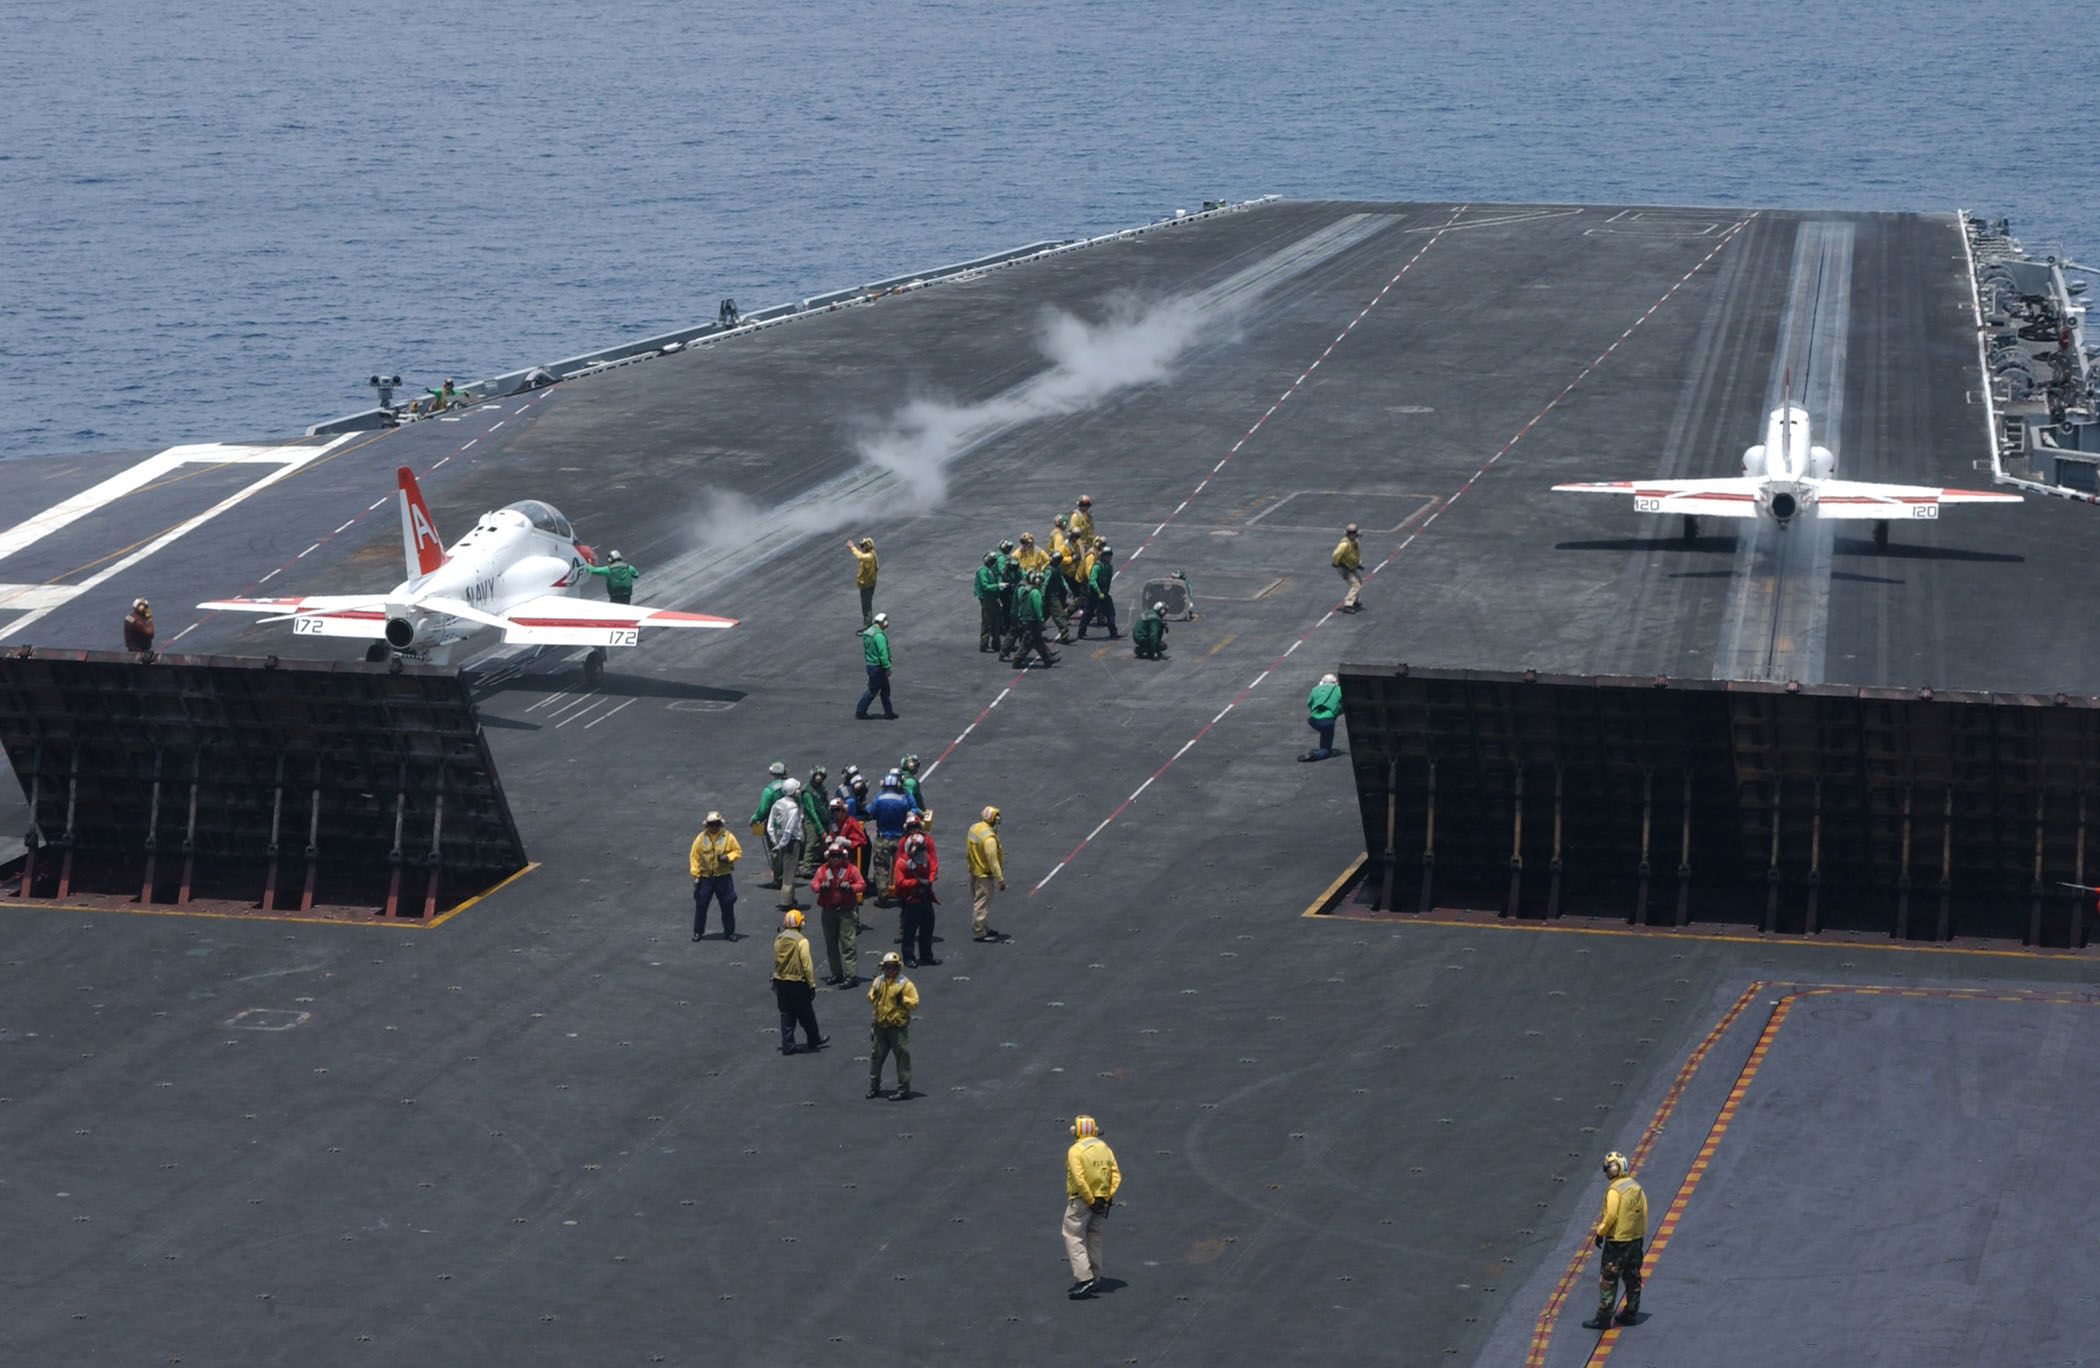 US_Navy_030713-N-1350S-006_Two_T-45C_Goshawks_assigned_to_Fixed_Wing_Training_Squadron_Seven_(VT-7)_prepare_to_take_off_from_flight_deck_of_USS_Harry_S._Truman_(CVN_75).jpg (2100×1368)